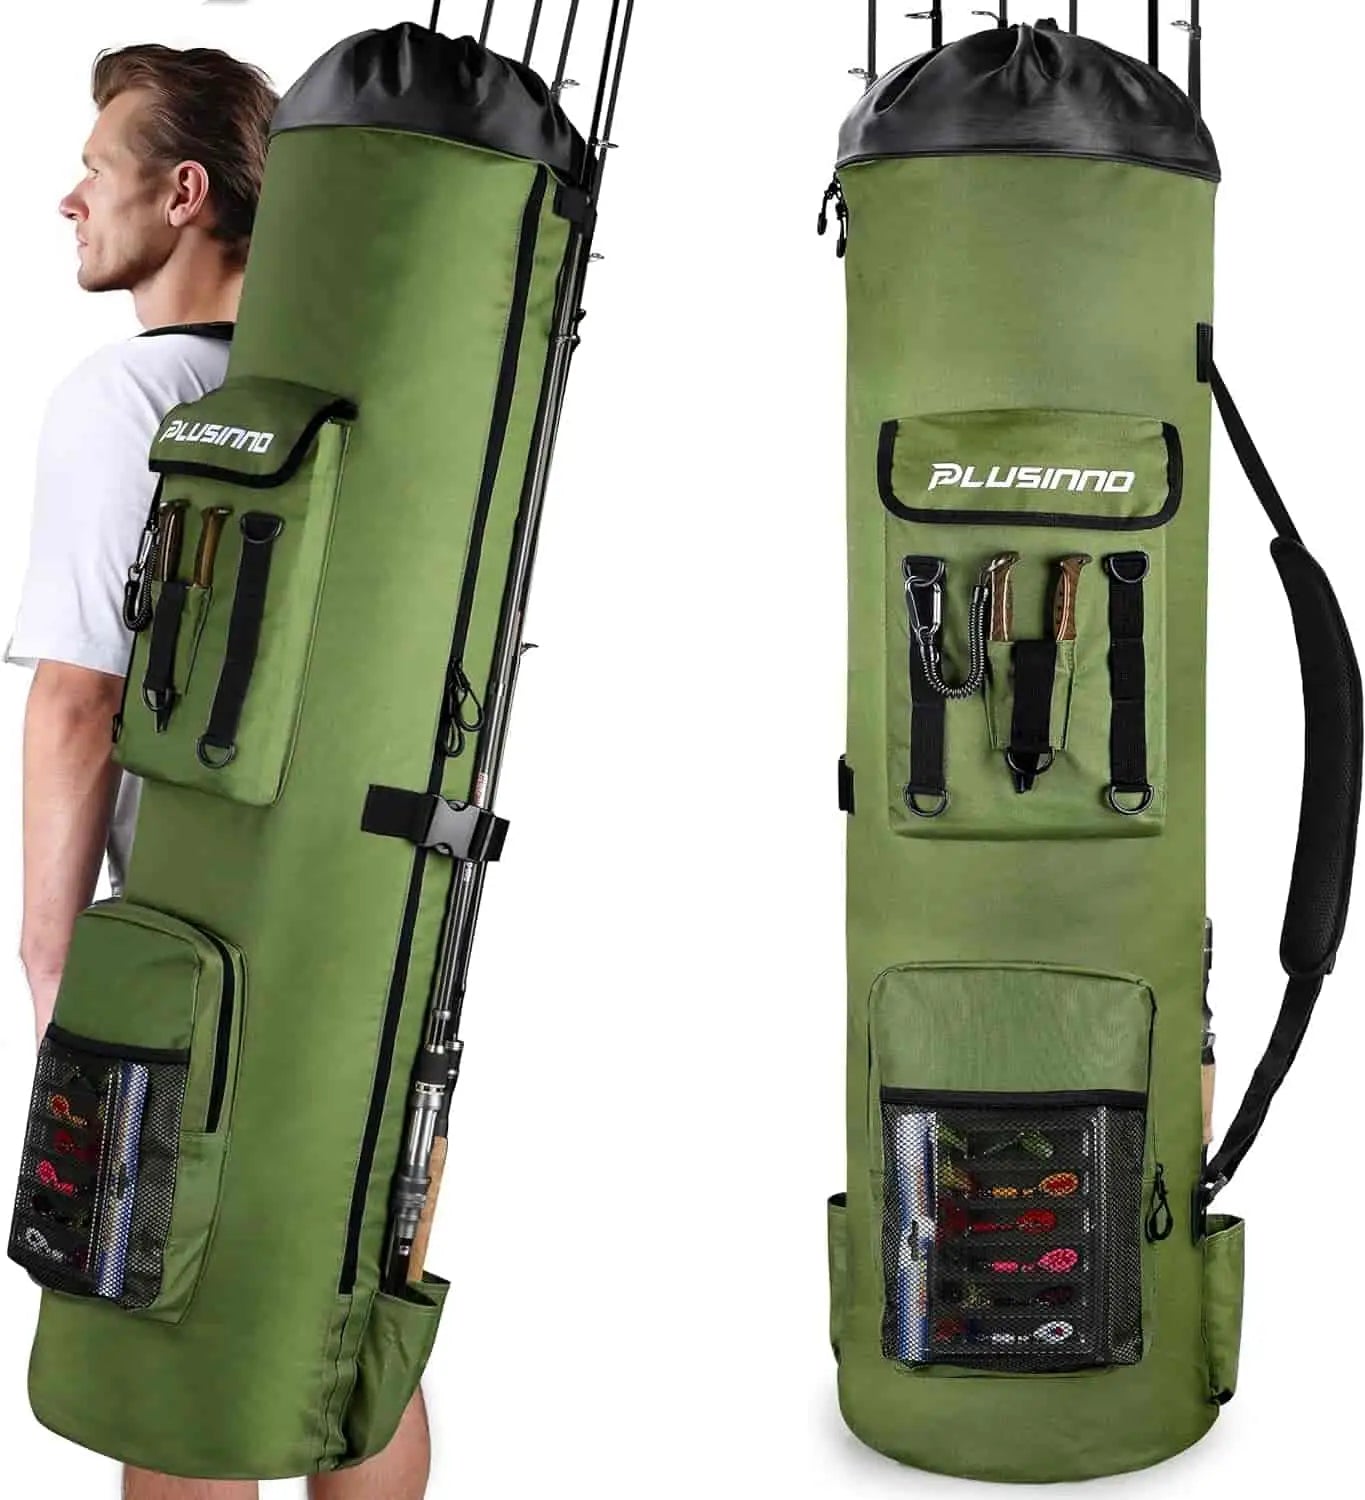  PLUSINNO Fishing Backpack with Rod Holders, 42L Large  Water-resistant Fishing Tackle Bag Store Fishing Gear for Fishing, Camping,  Hiking, Fishing Gifts for Men Father, Green : Sports & Outdoors